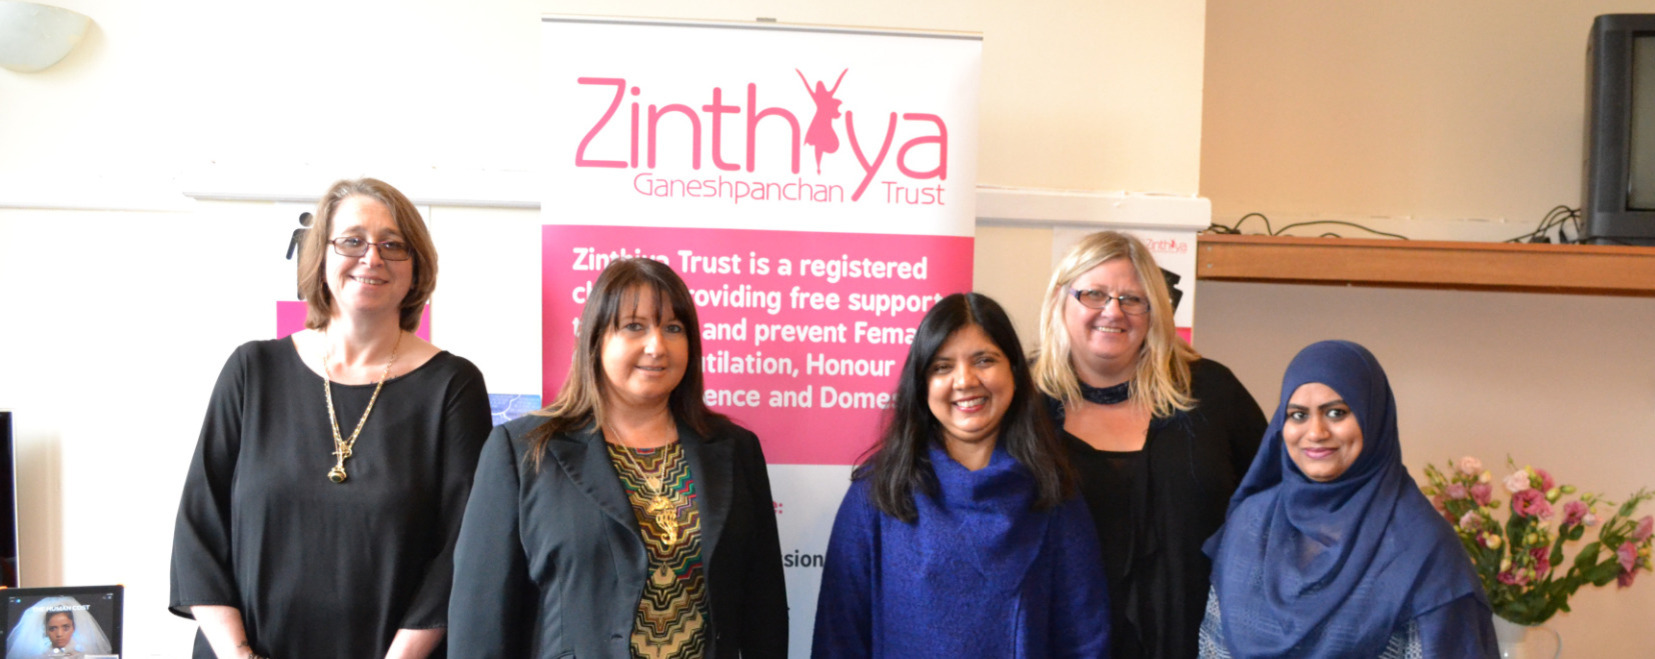 The team at The Zinthiya Trust